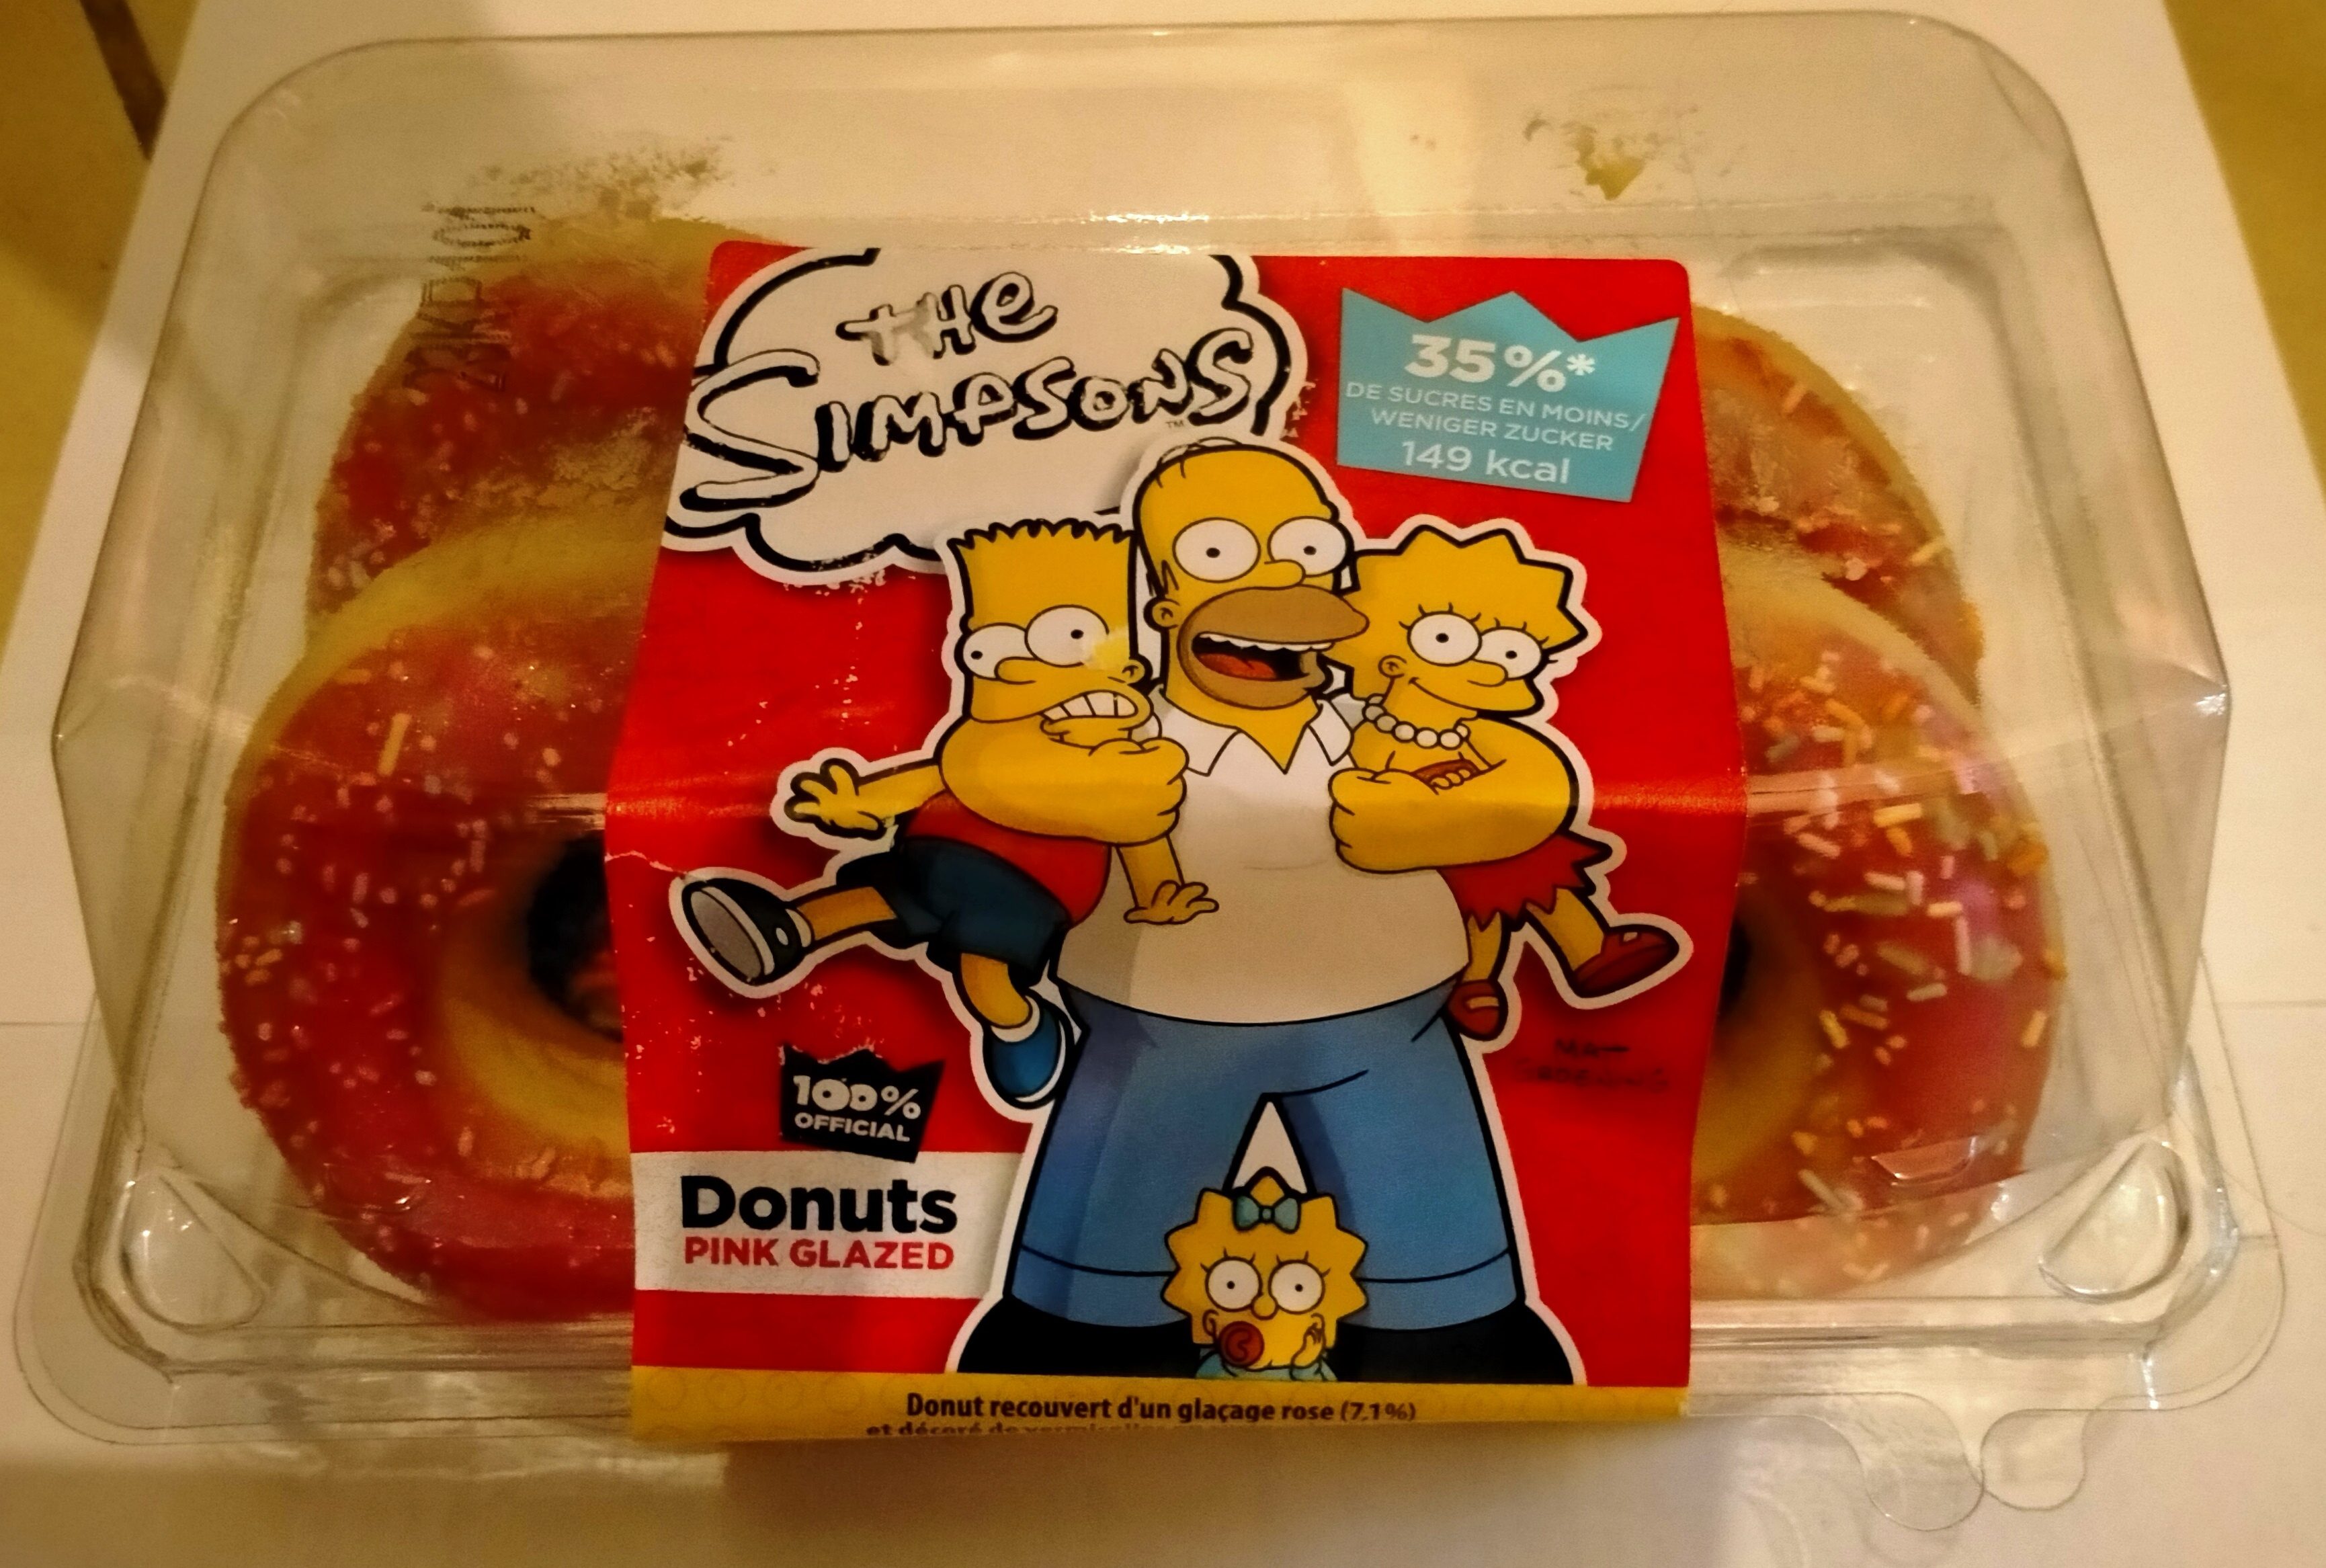 Donuts fraise simpson - Product